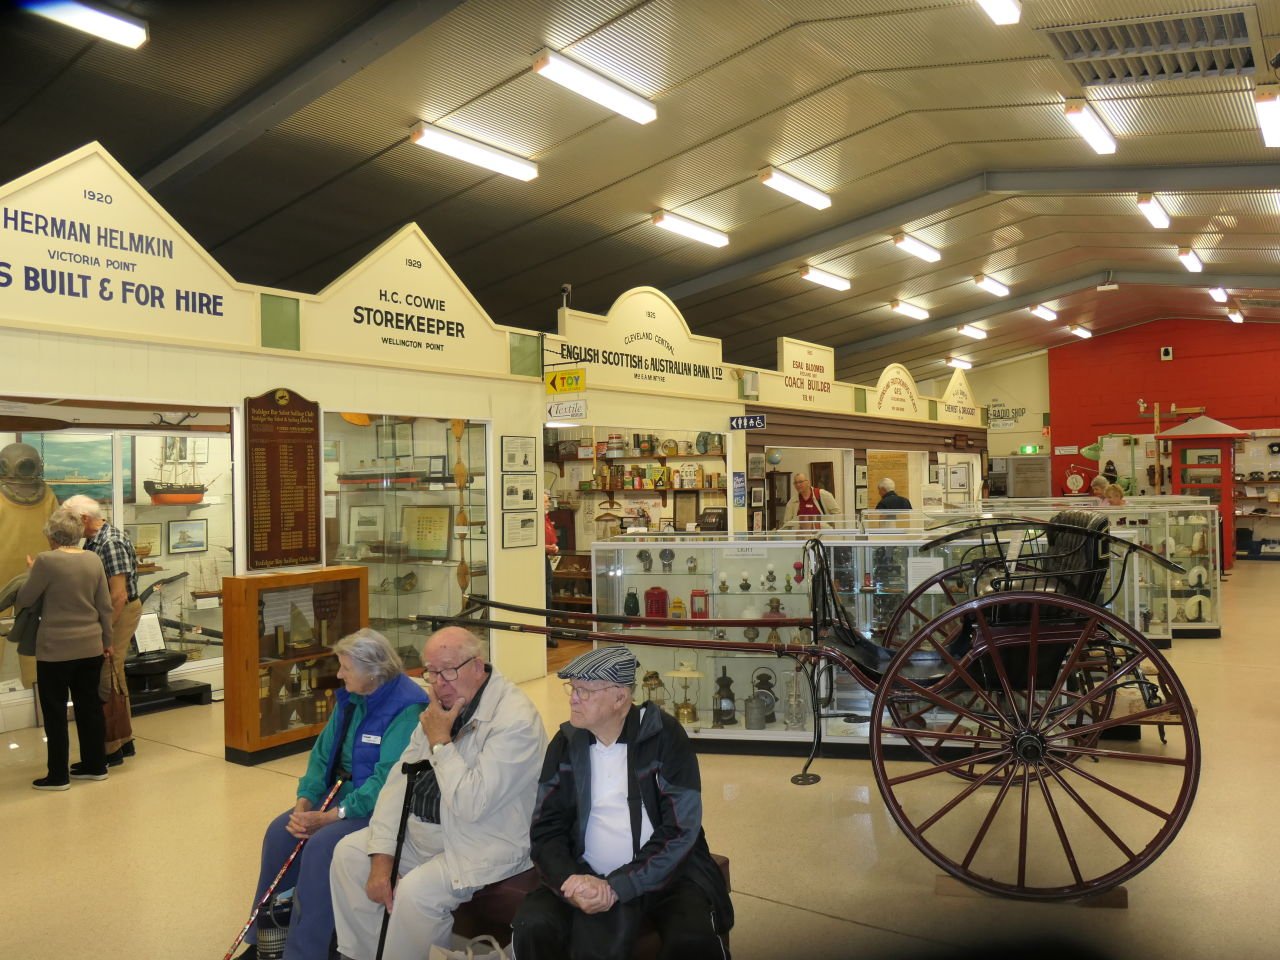 Redlands Museum Coach - 18 May 21.
Attractive layout with guides who explained the exhibits